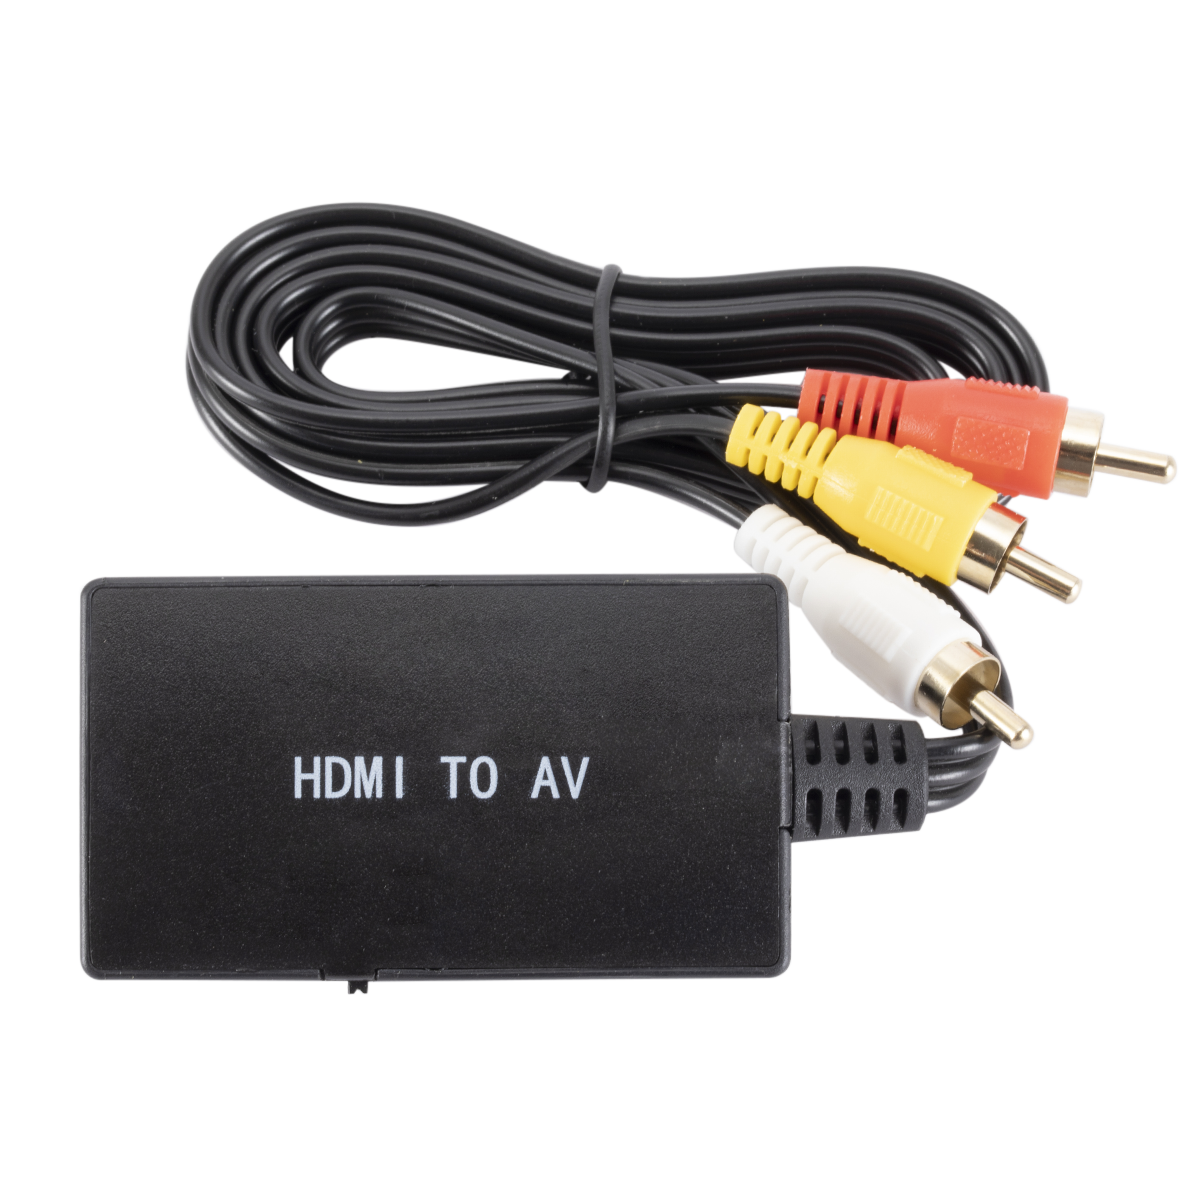 

HDMI to AV Converter 1080P for HD DVD VHS DVD Players TV Boxes HD PVR HD DVR HD Video Recorders PS3 for Xbox 360 Game Co